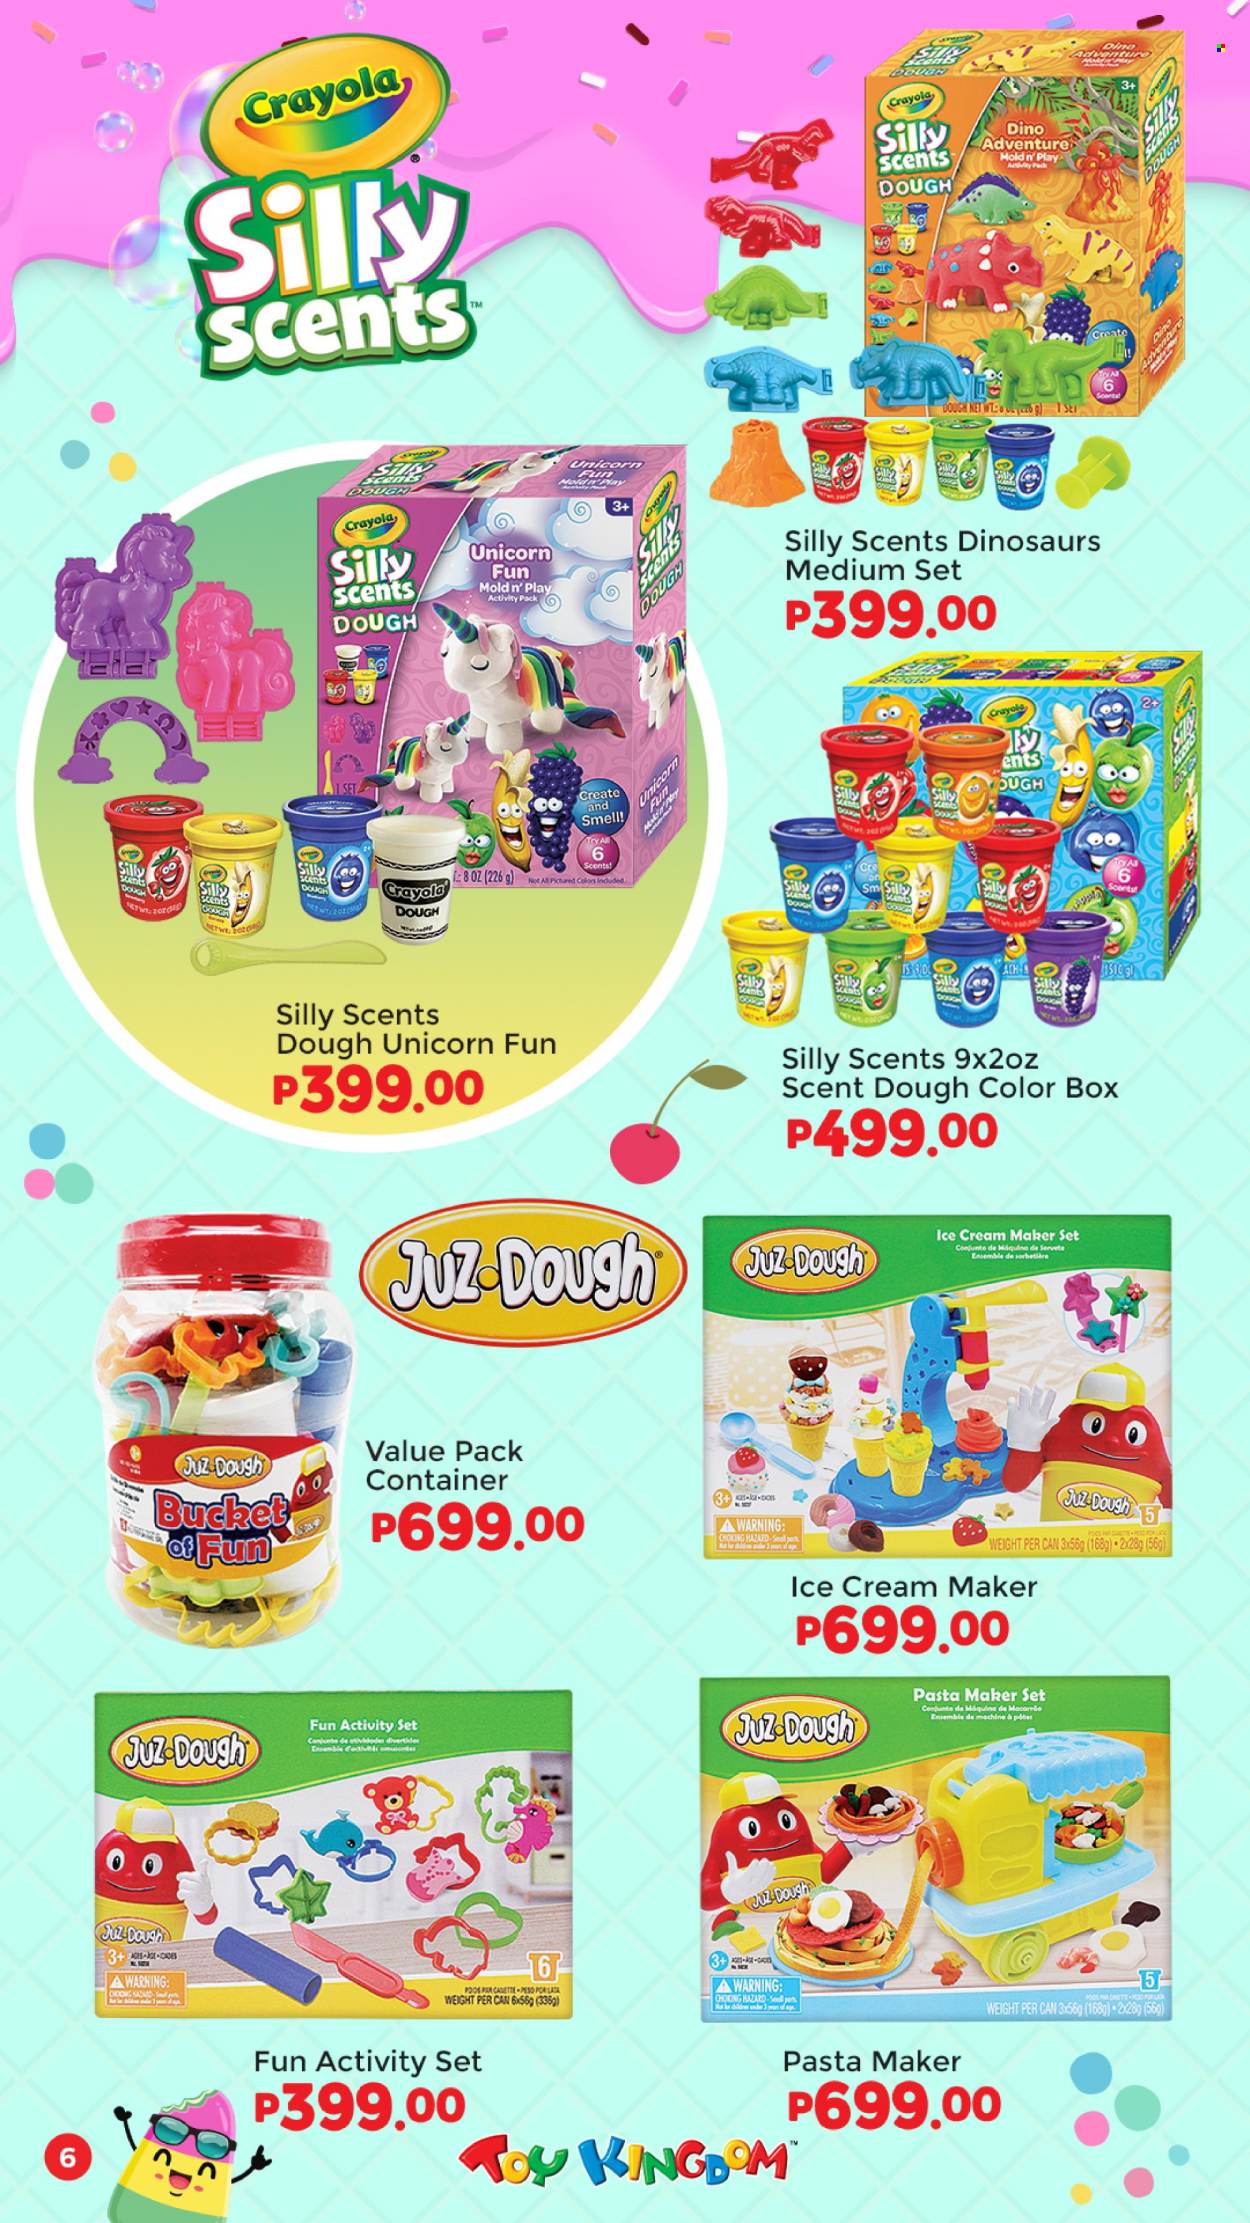 thumbnail - Toy Kingdom offer  - Sales products - container, pasta maker, crayons, toys. Page 6.